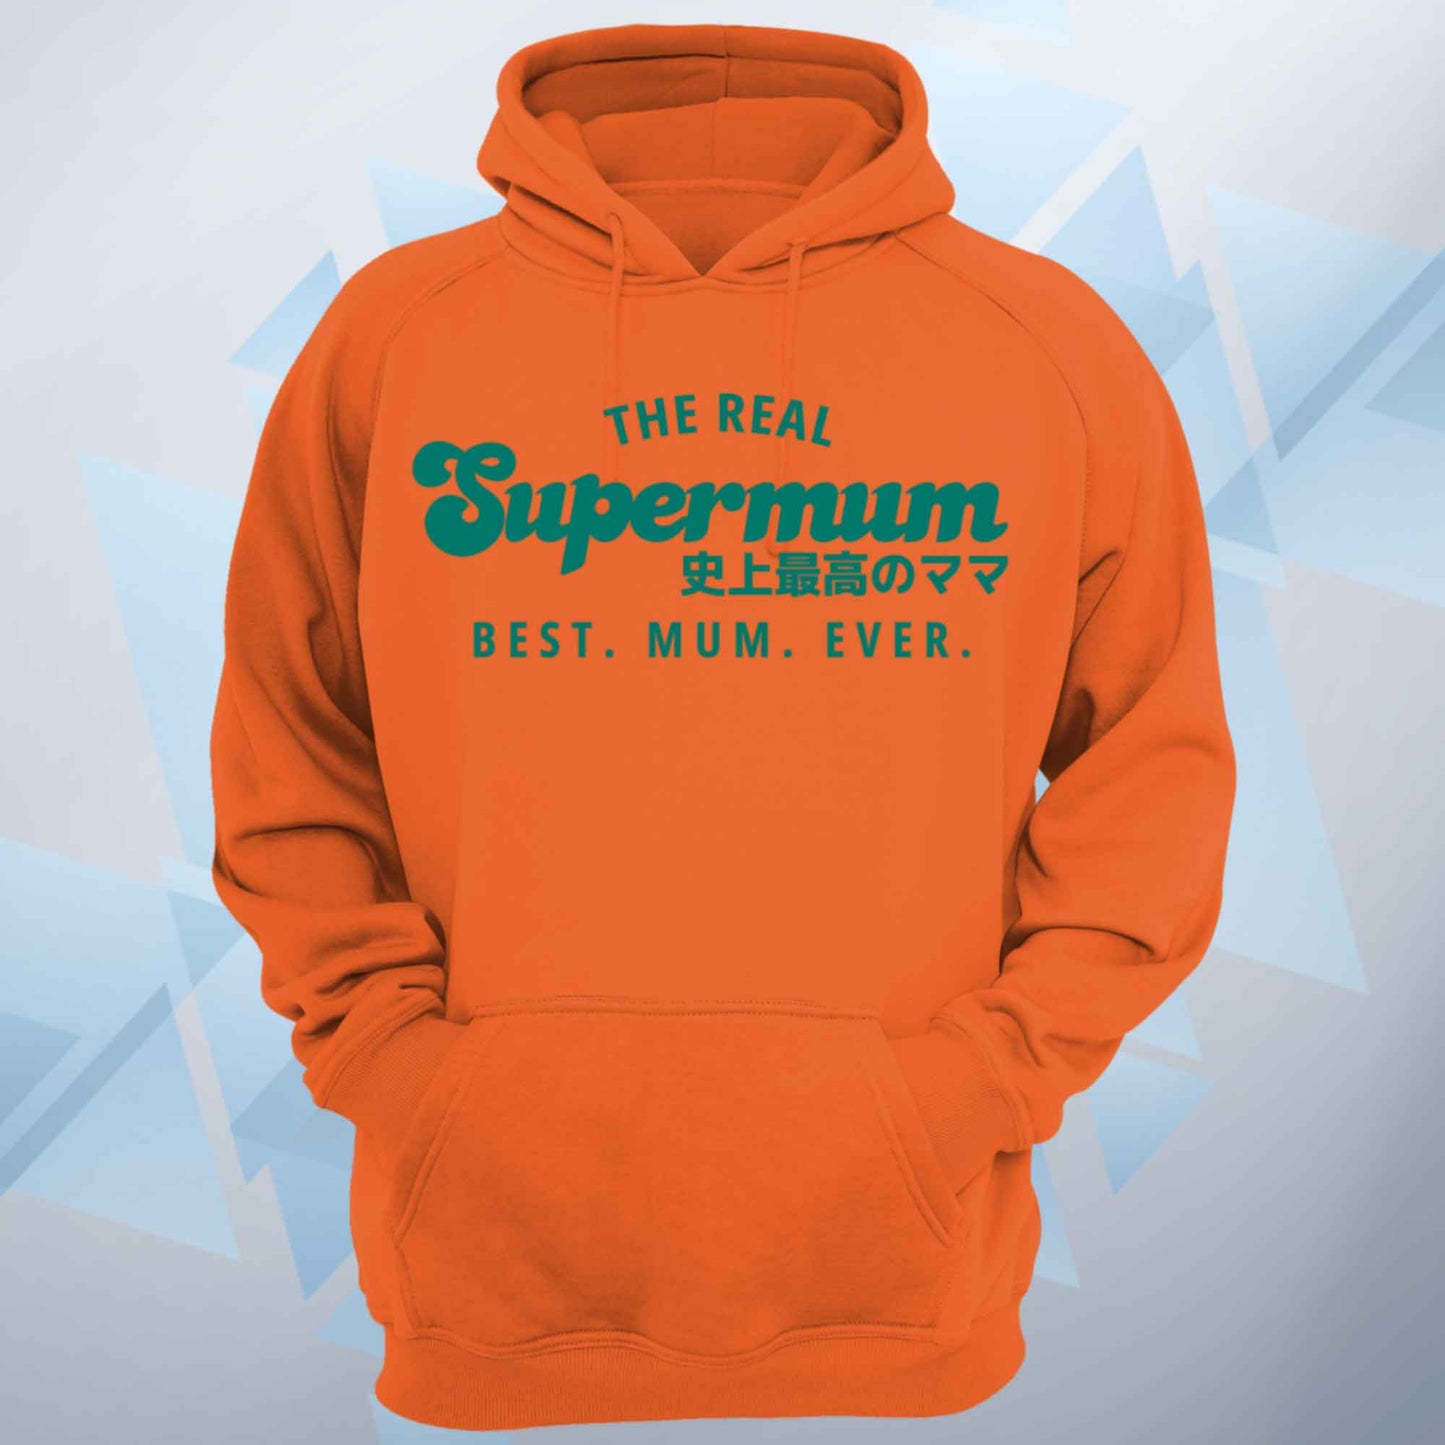 The Real Supermum Green Hoodie